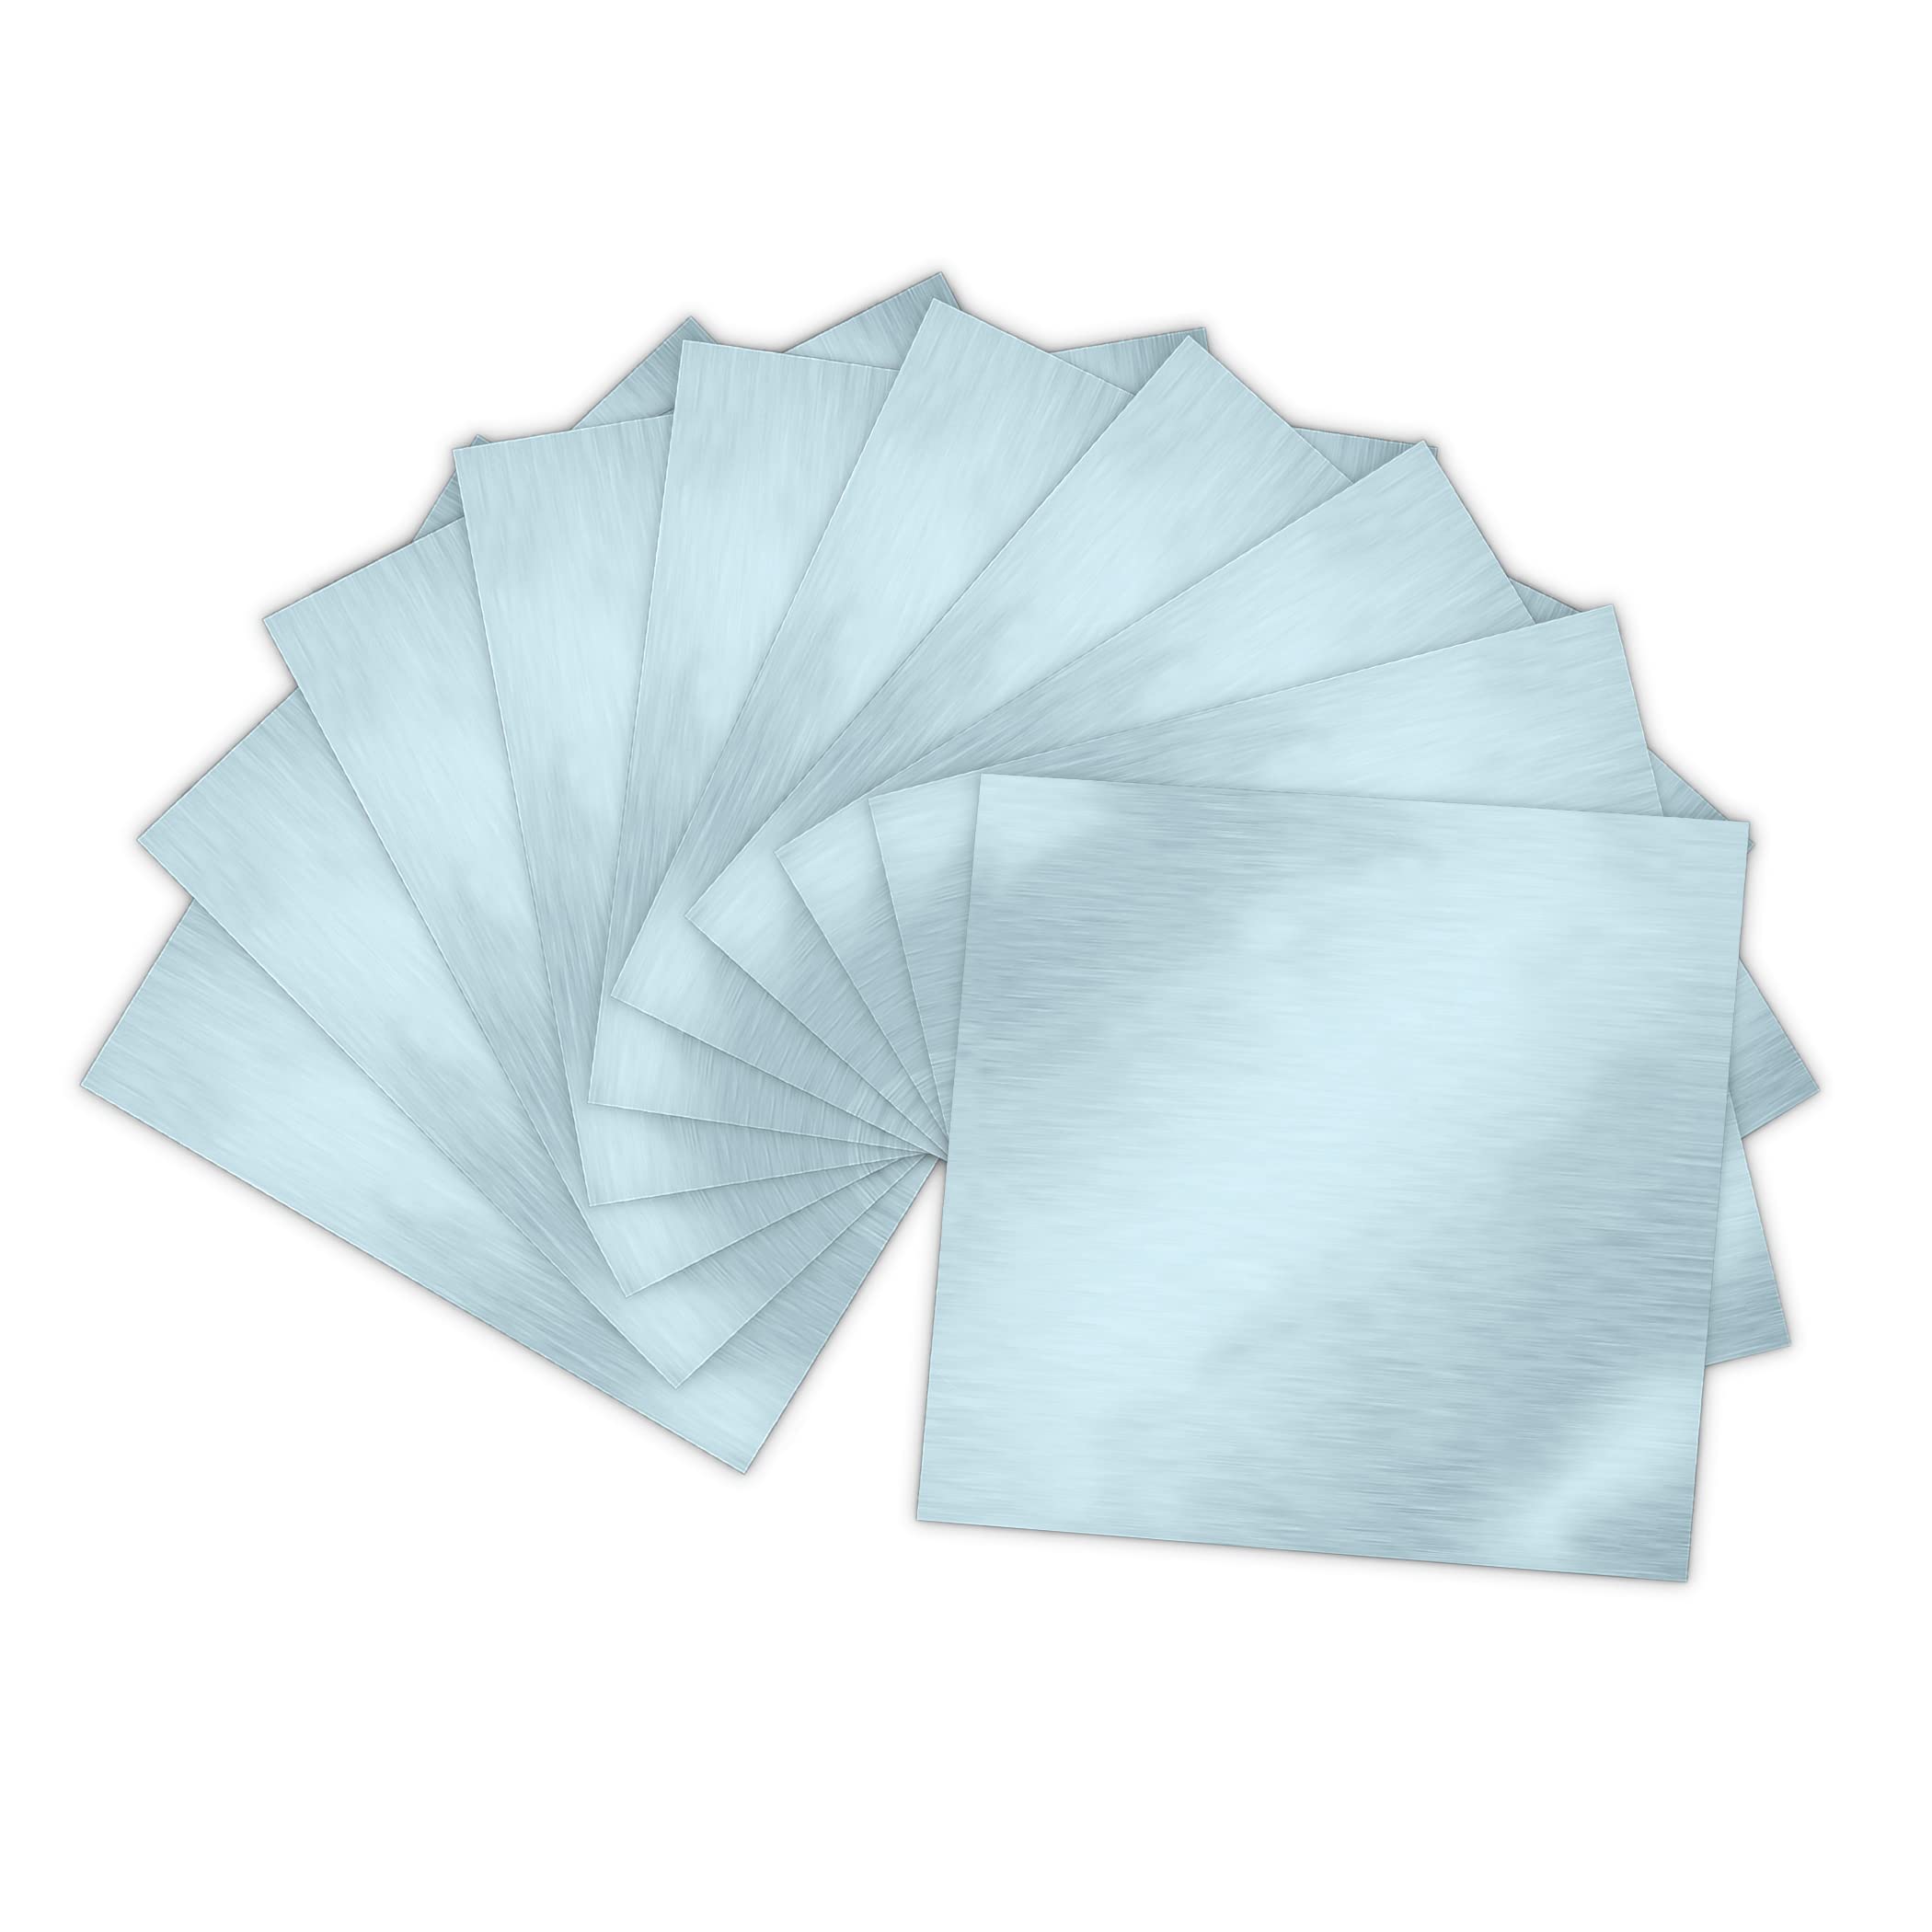 Brushed Silver Adhesive Backed Vinyl Sheets Used for Crafting (10 Pack)  Brushed Silver 1